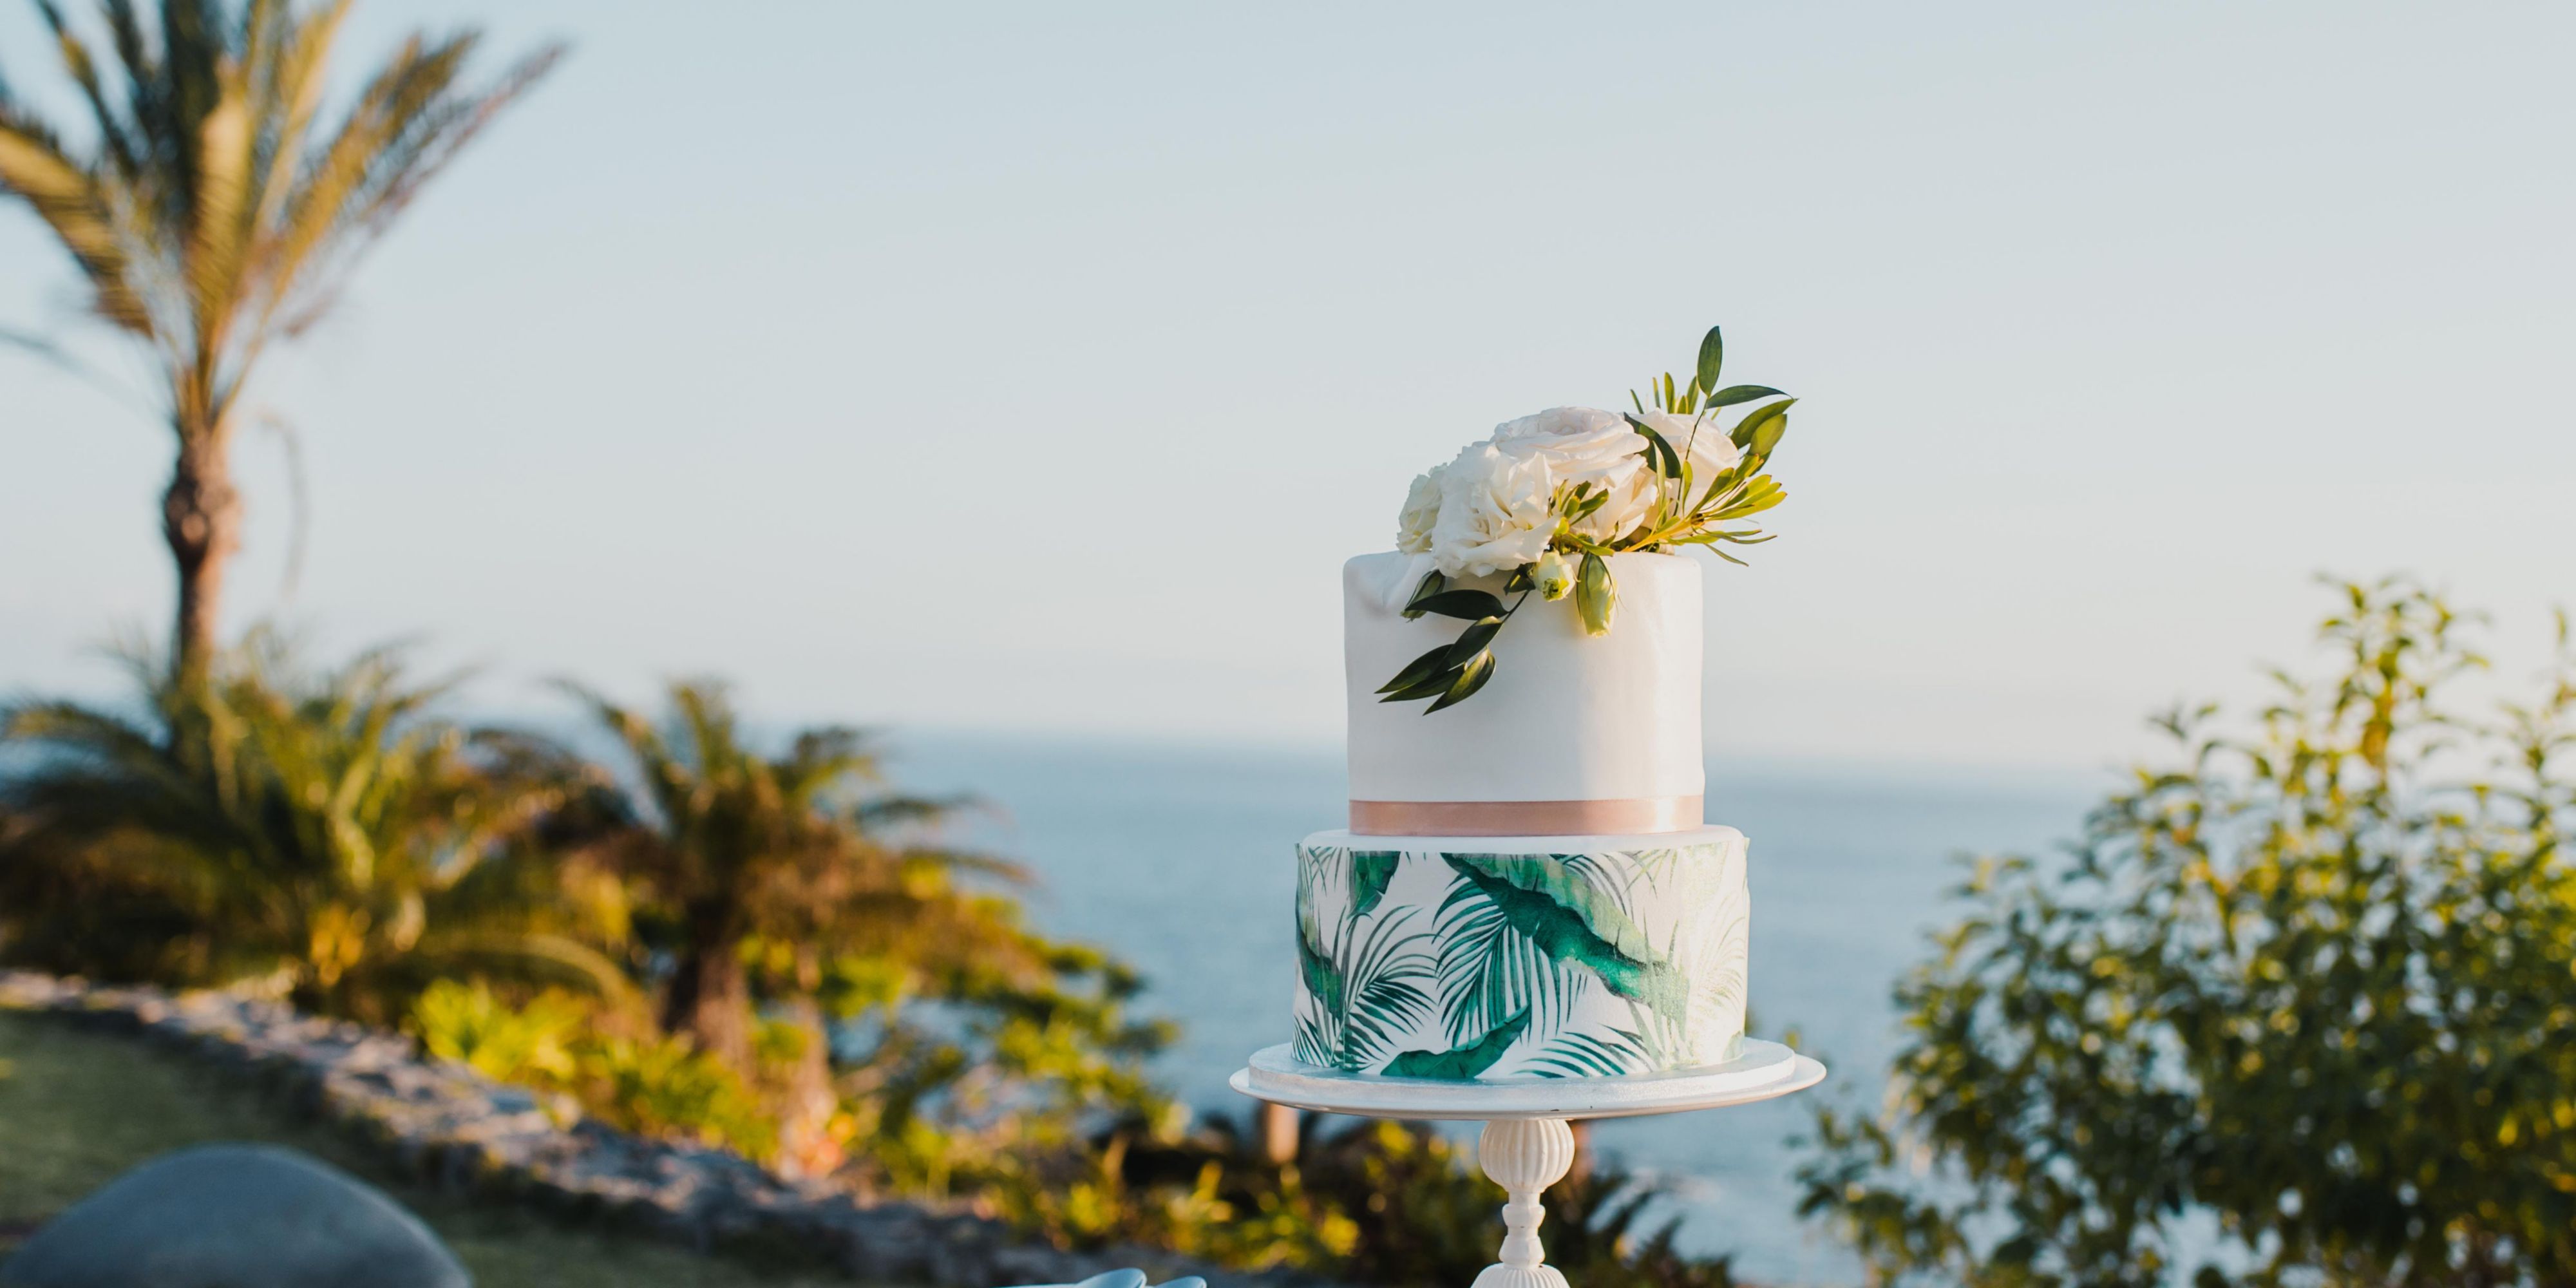 Celebrate with a backdrop of the Caribbean sea with Dominica's lush tropical beauty all around. The pristine resort is a scenic venue for a destination wedding or special event in Dominica. The hotel also offers gourmet catering for your beach parties and gatherings.